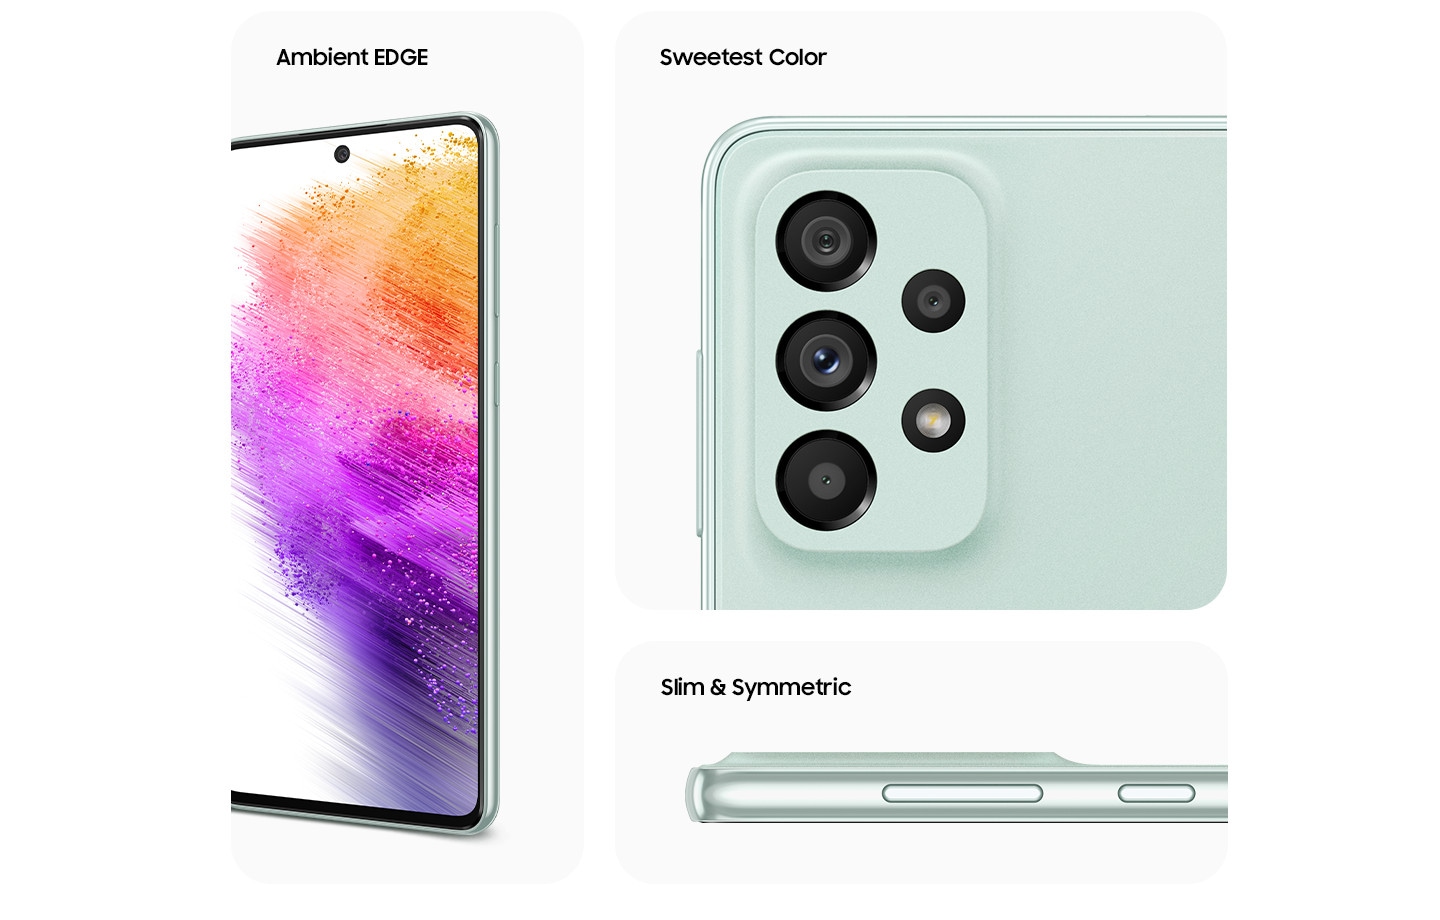 Samsung A73 5G camera specs - A73 in Awesome Mint seen from multiple angles : rear, front, side and close-up on the rear camera. Text saying Ambient EDGE, Sweetest colour, Slim & Symmetric.